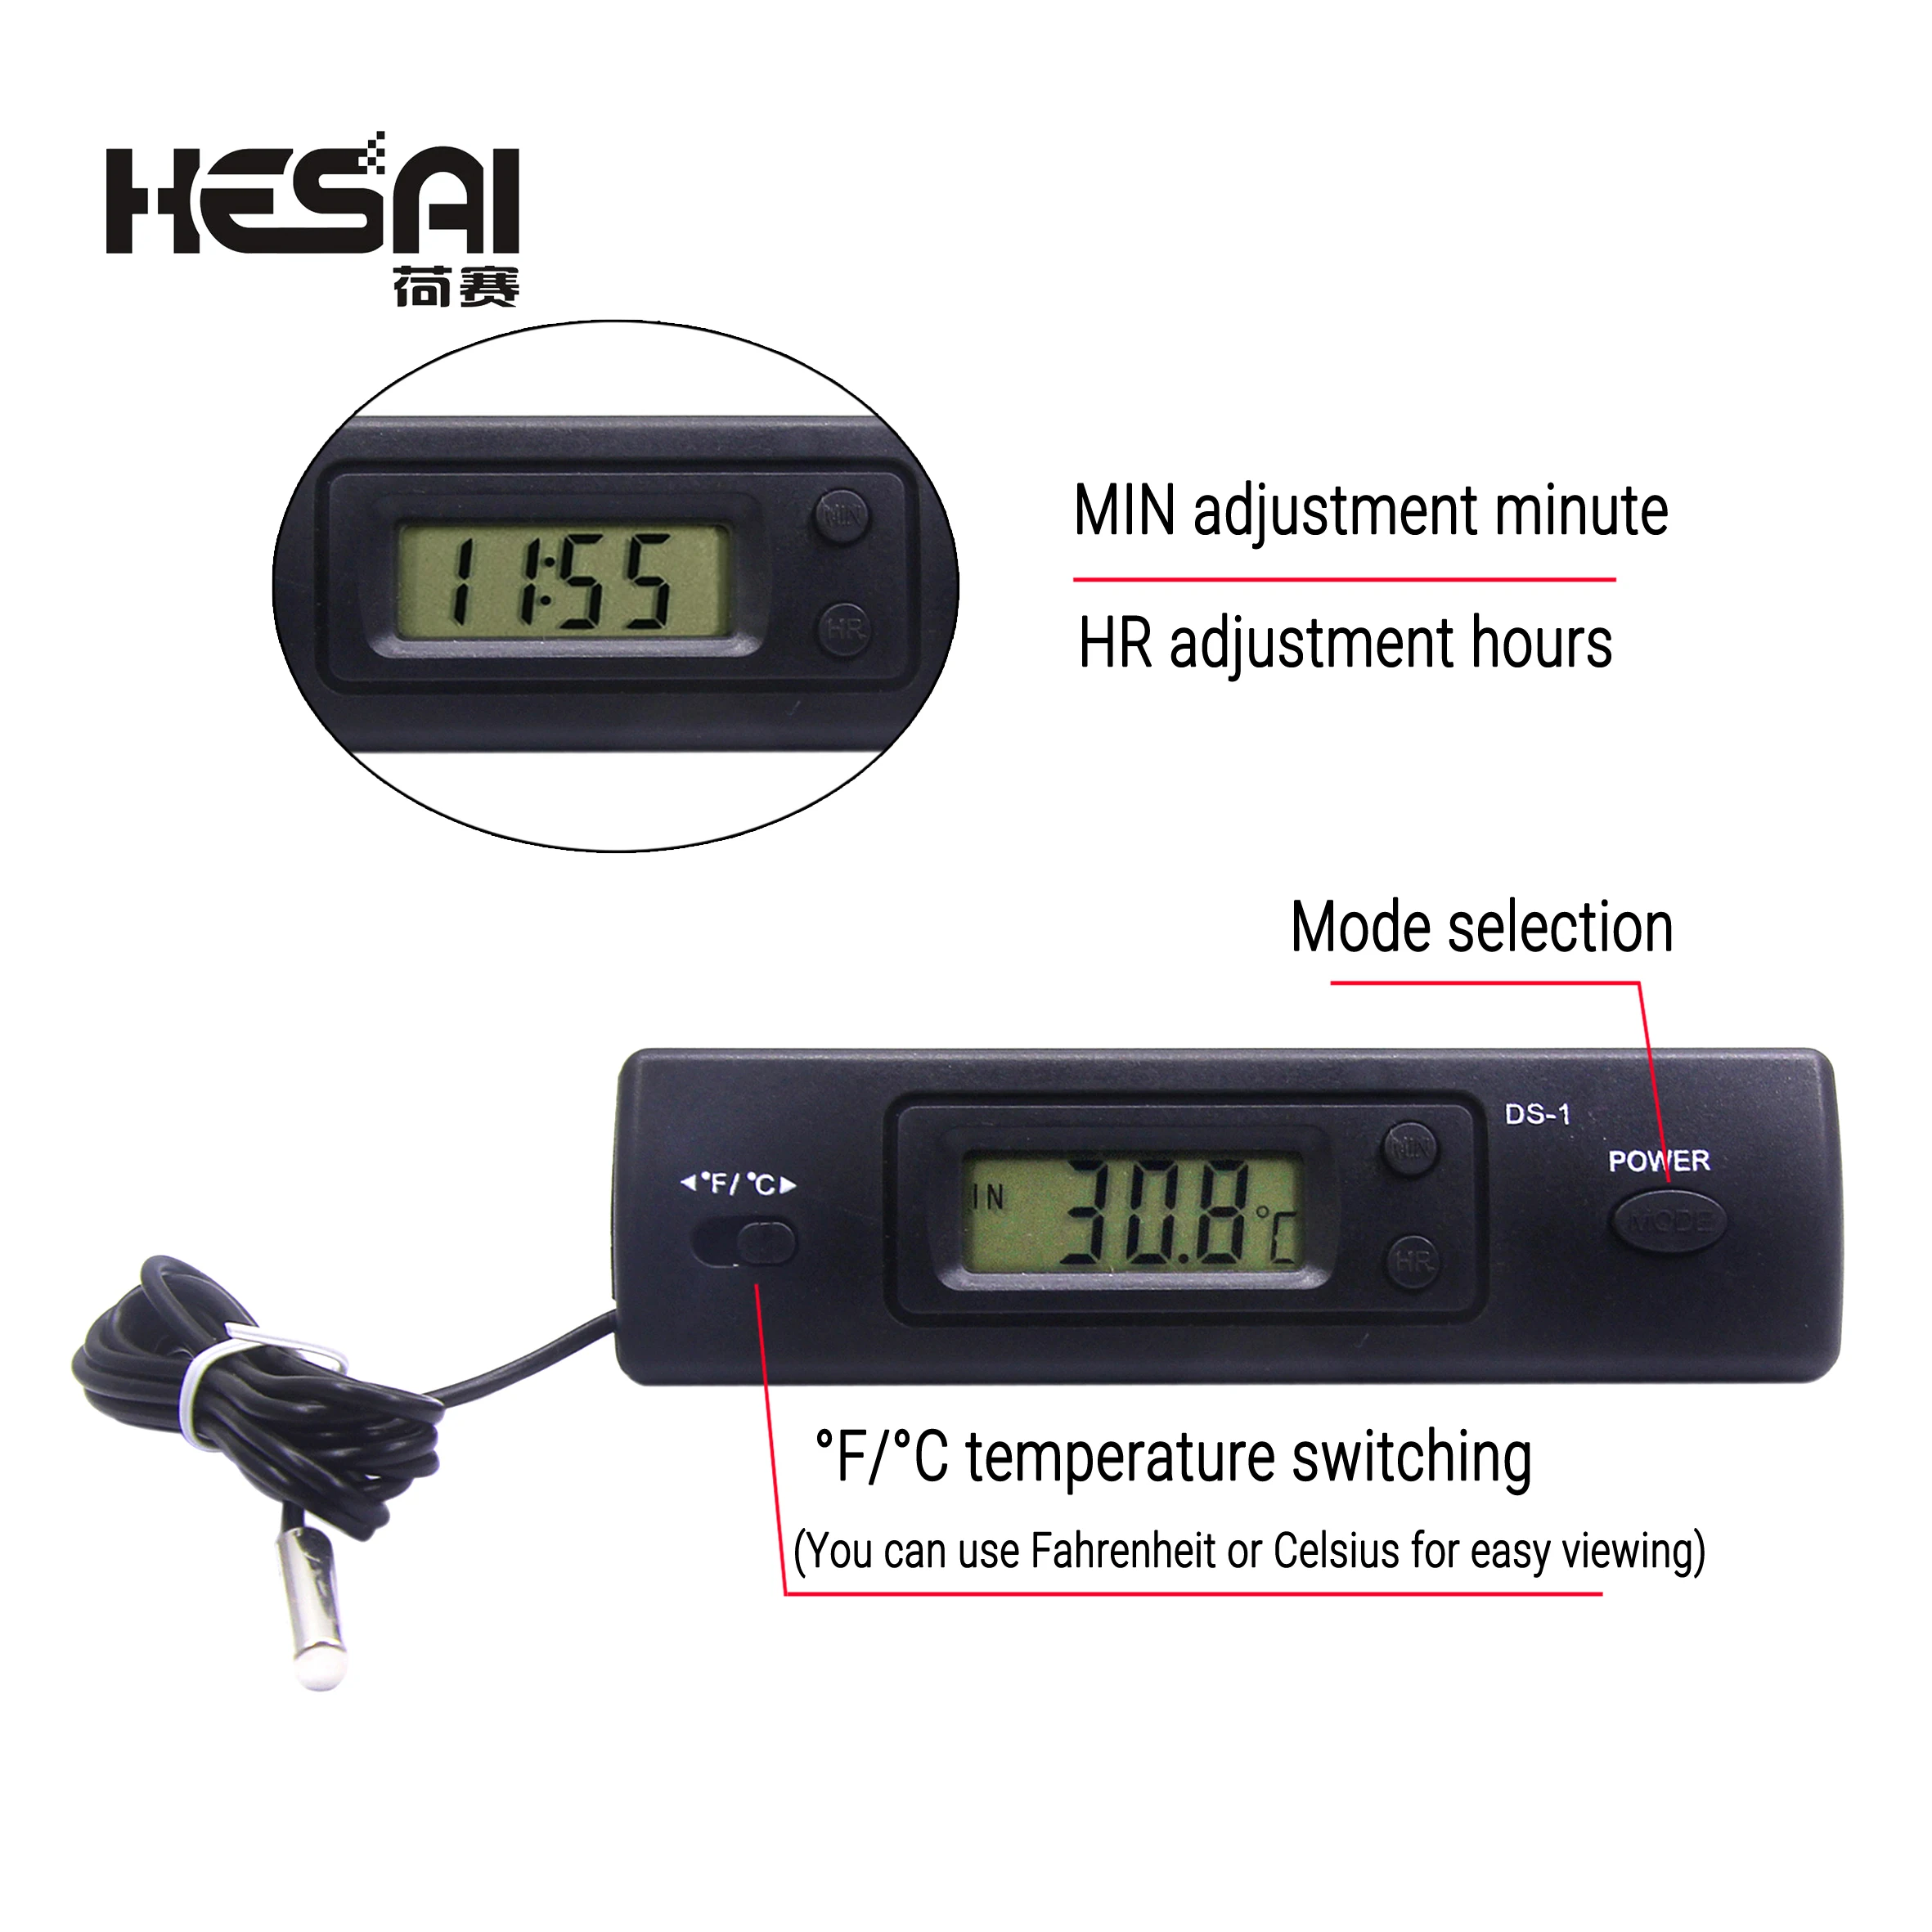 

New Mini Embedded Electronic Digital Display Thermometer Fish Tank Thermometer Waterproof DS-1 Large Screen